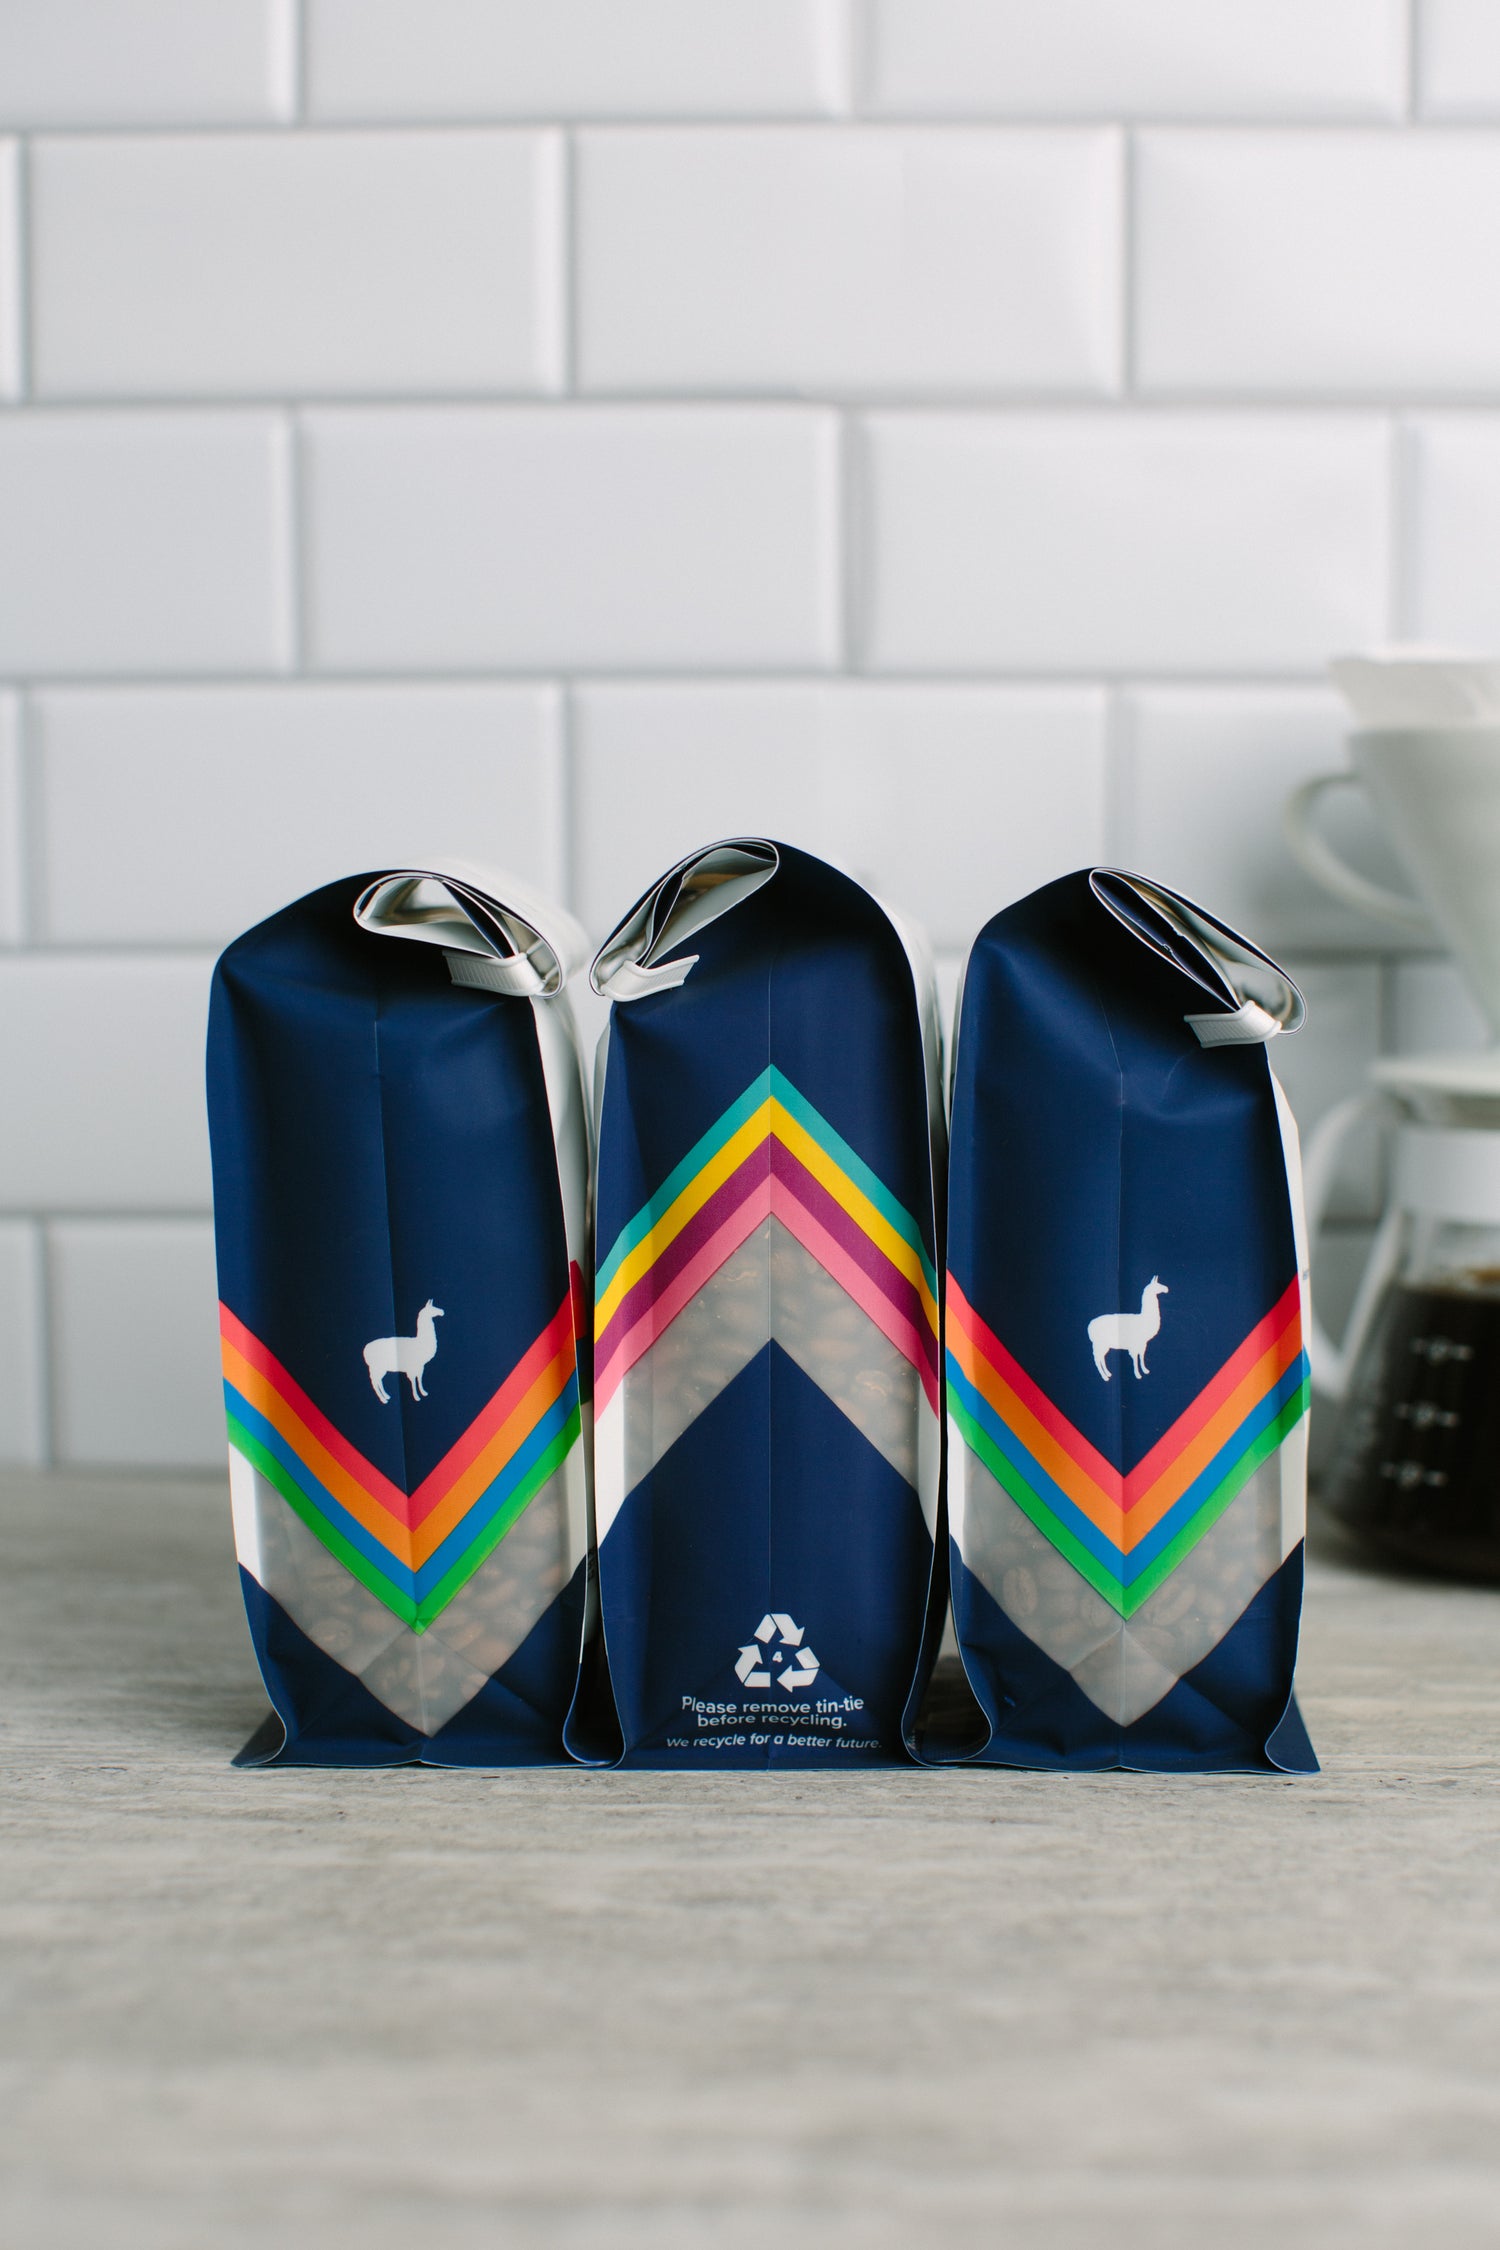 Image of three coffee bags in kitchen.